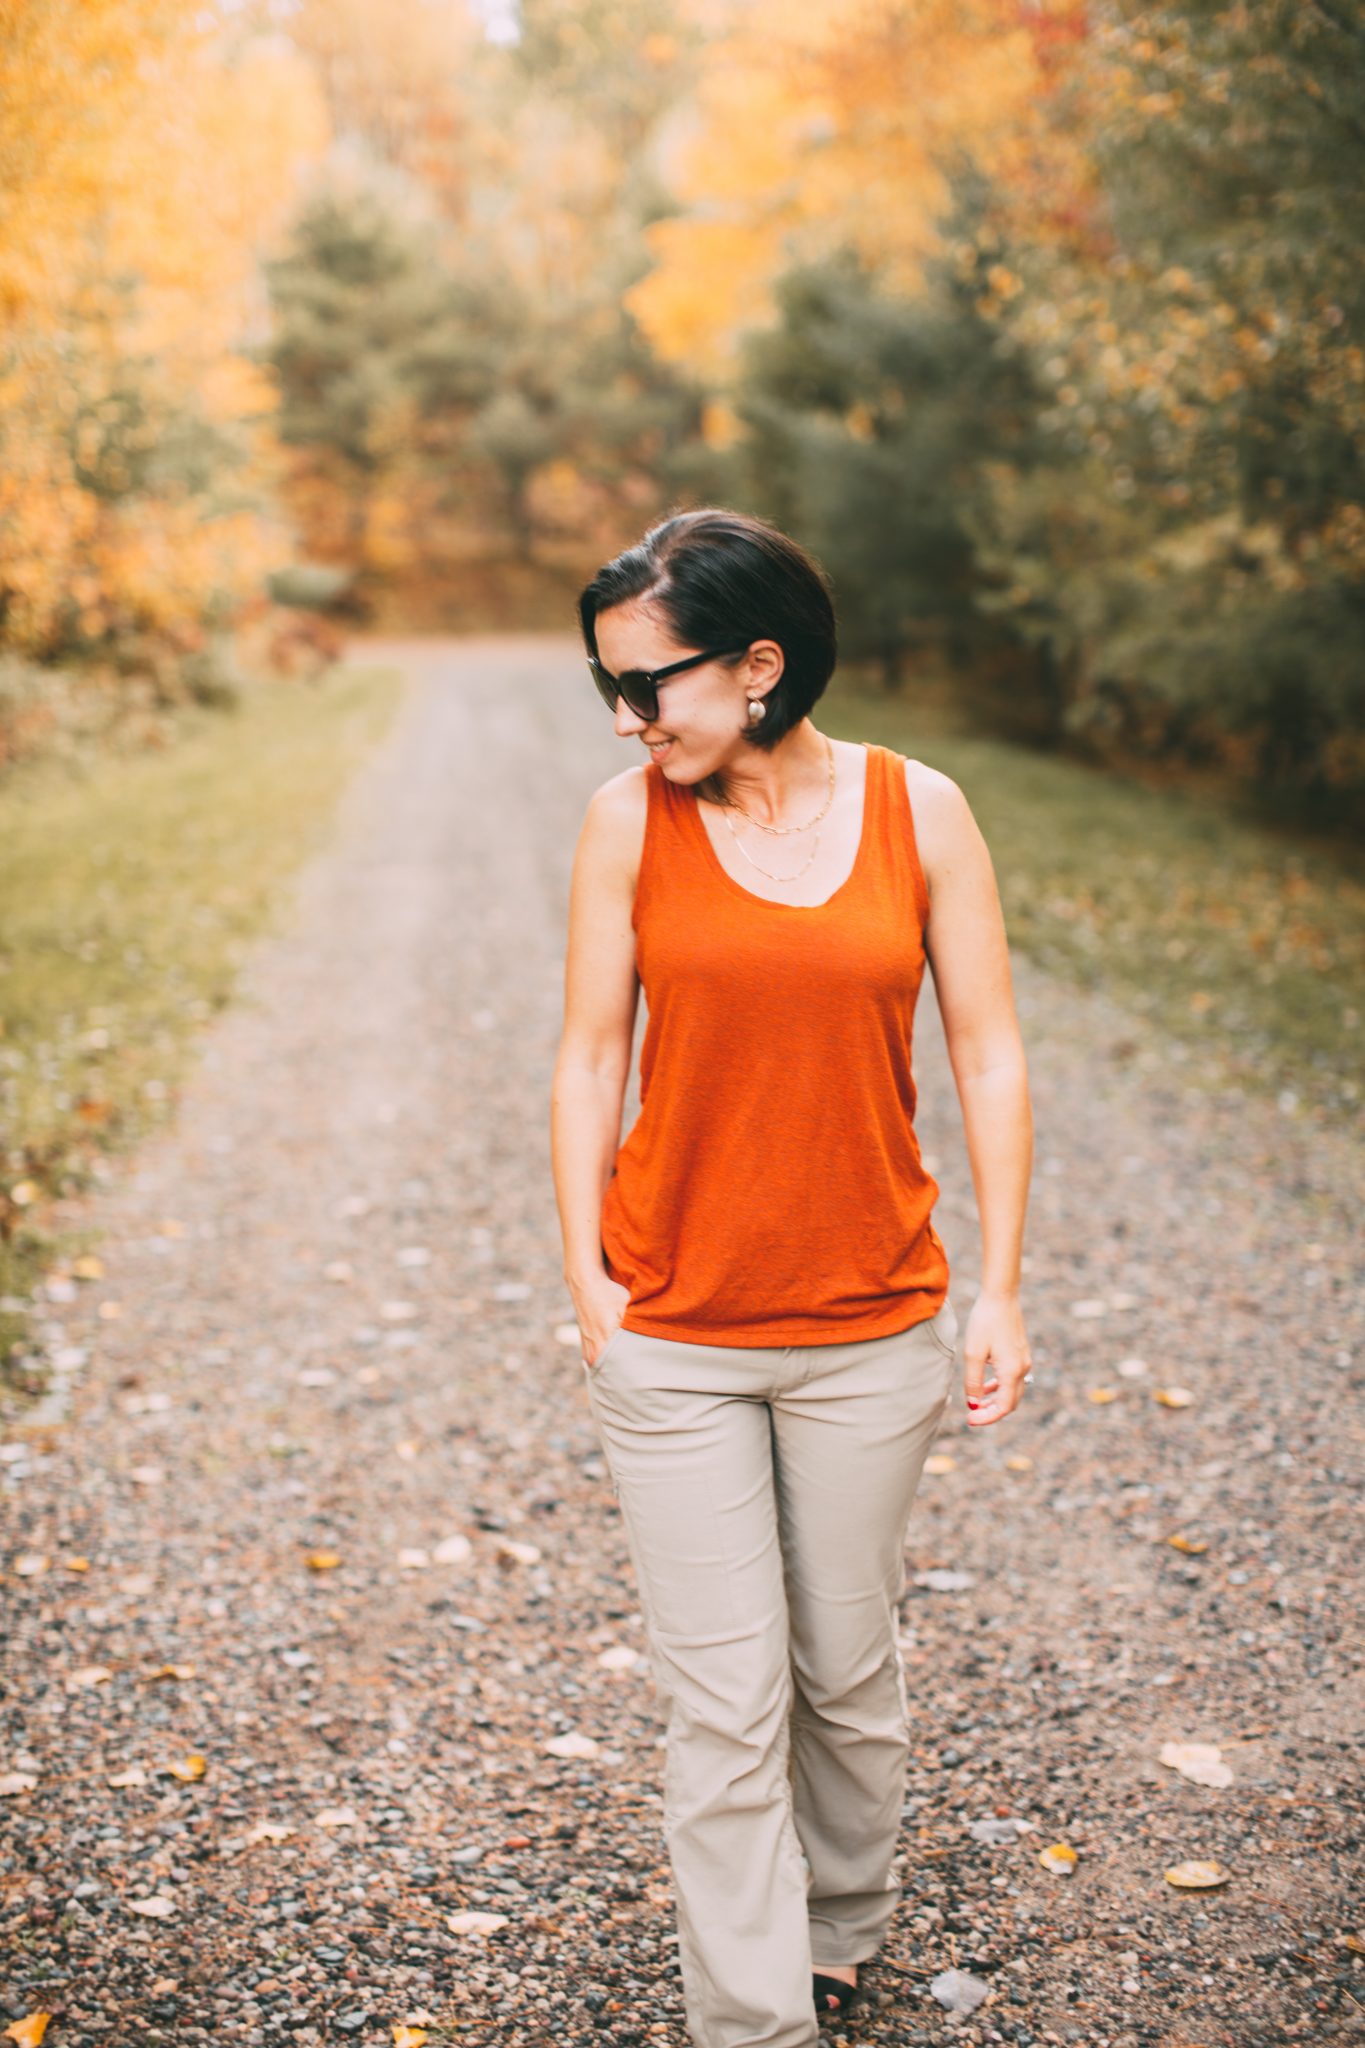 I'm wearing an orange prAna tank top & khaki pants here and am walking on a gravel road surrounded by fall foliage